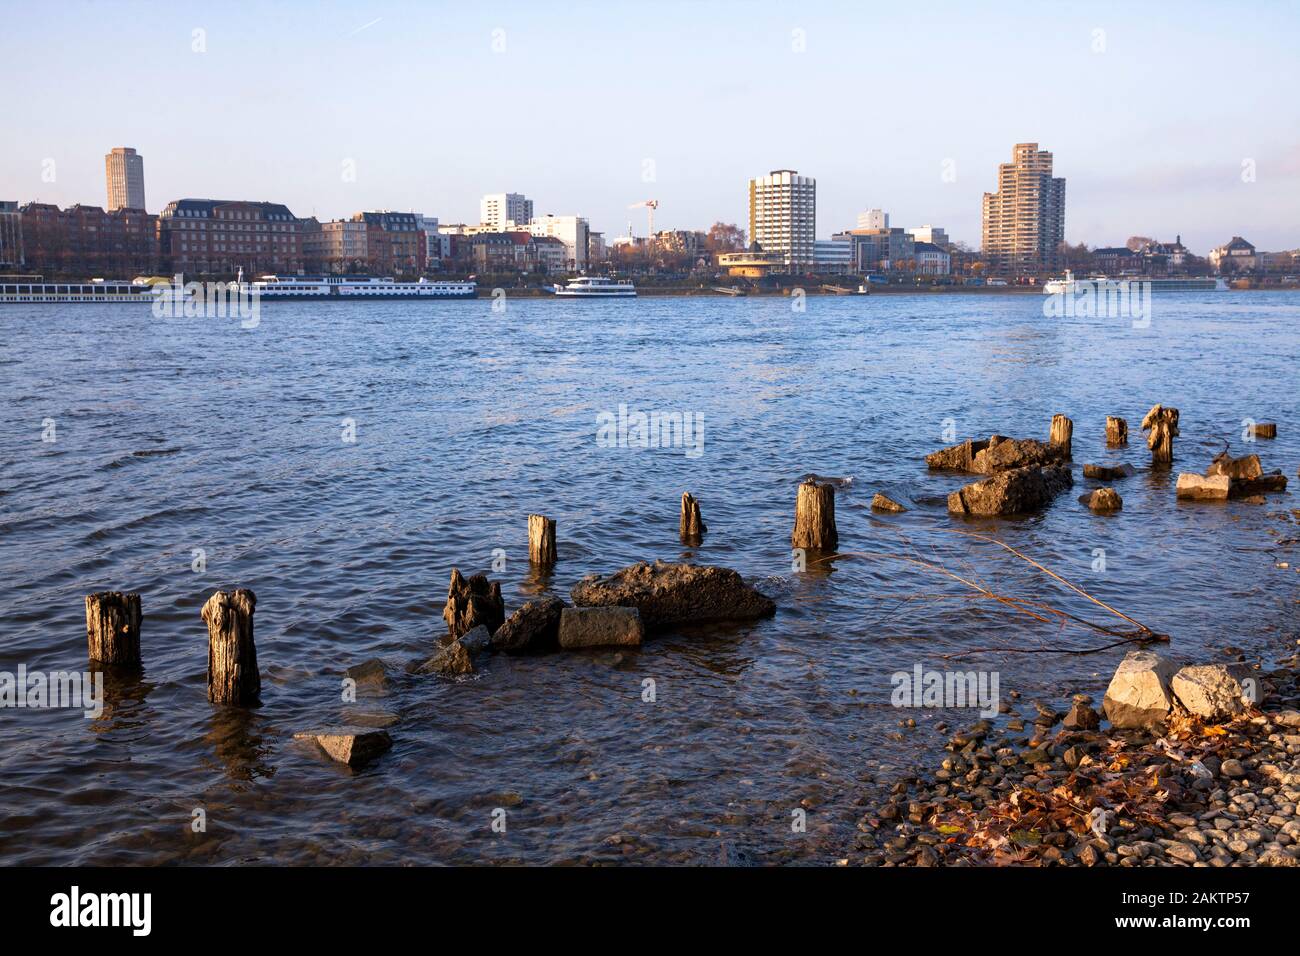 remains of an old wooden landing pier on the banks of the Rhine in the dirstrict Deutz, view to the Bastei, Cologne, Germany.  Reste eines alten Boots Stock Photo